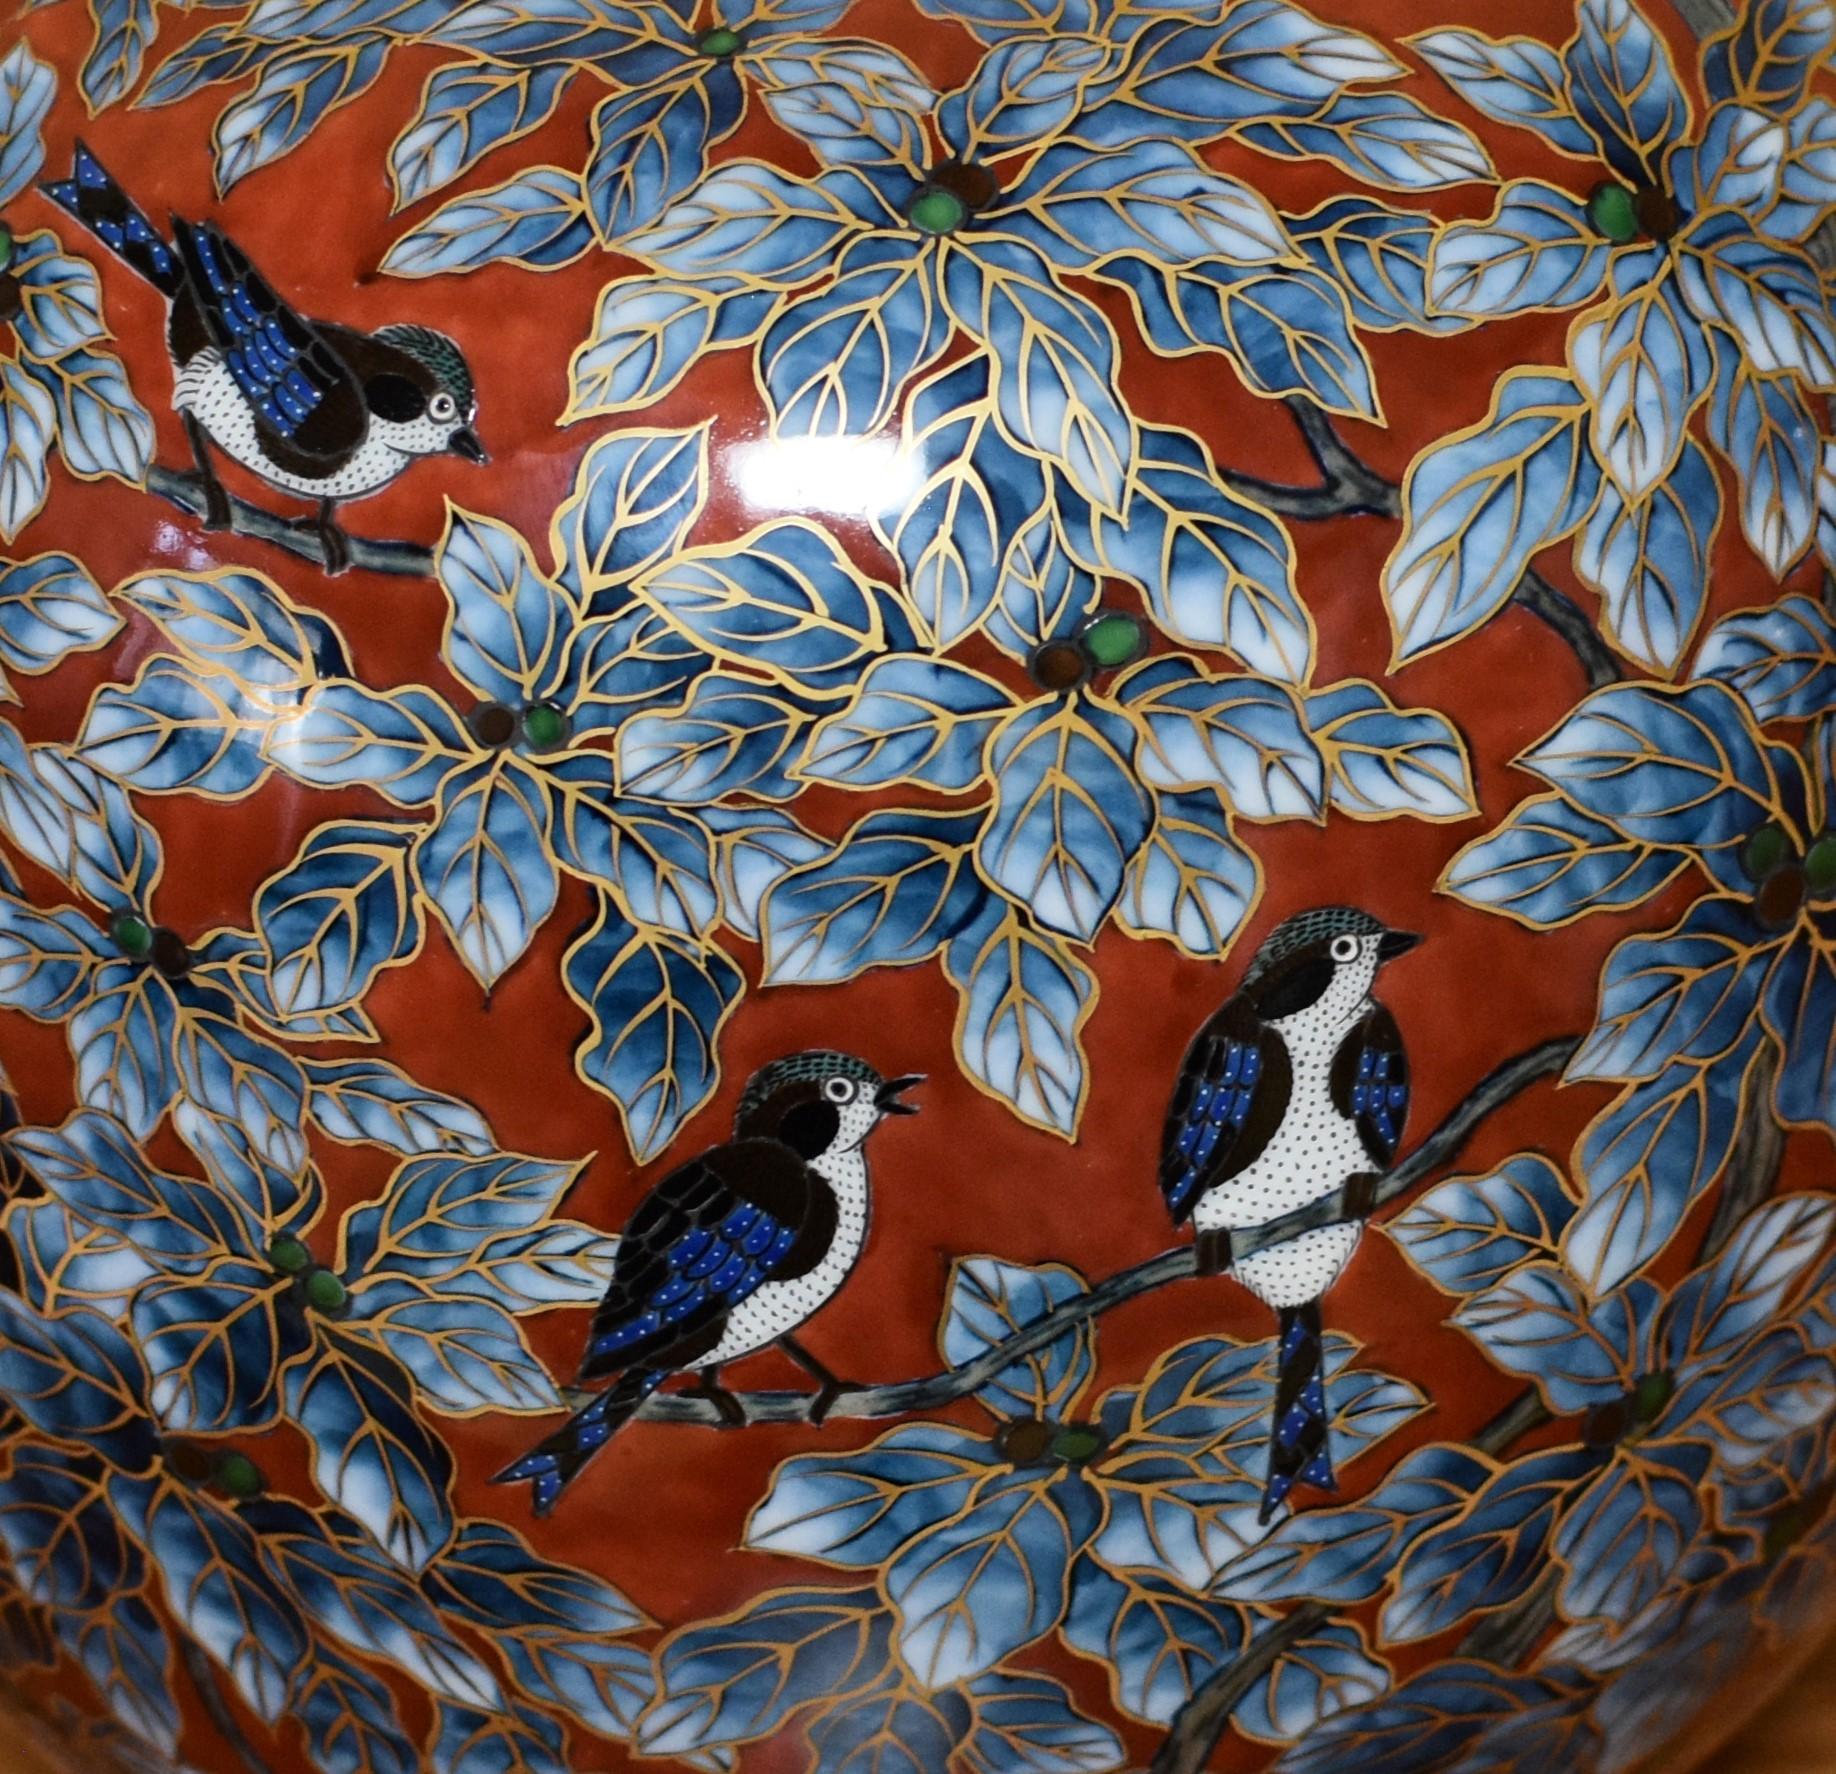 Extraordinary Japanese contemporary decorative porcelain vase, painstakingly intricately gilded and hand painted in stunning blue and red on a beautiful globular body, a signed masterpiece by second-generation master porcelain artist of the